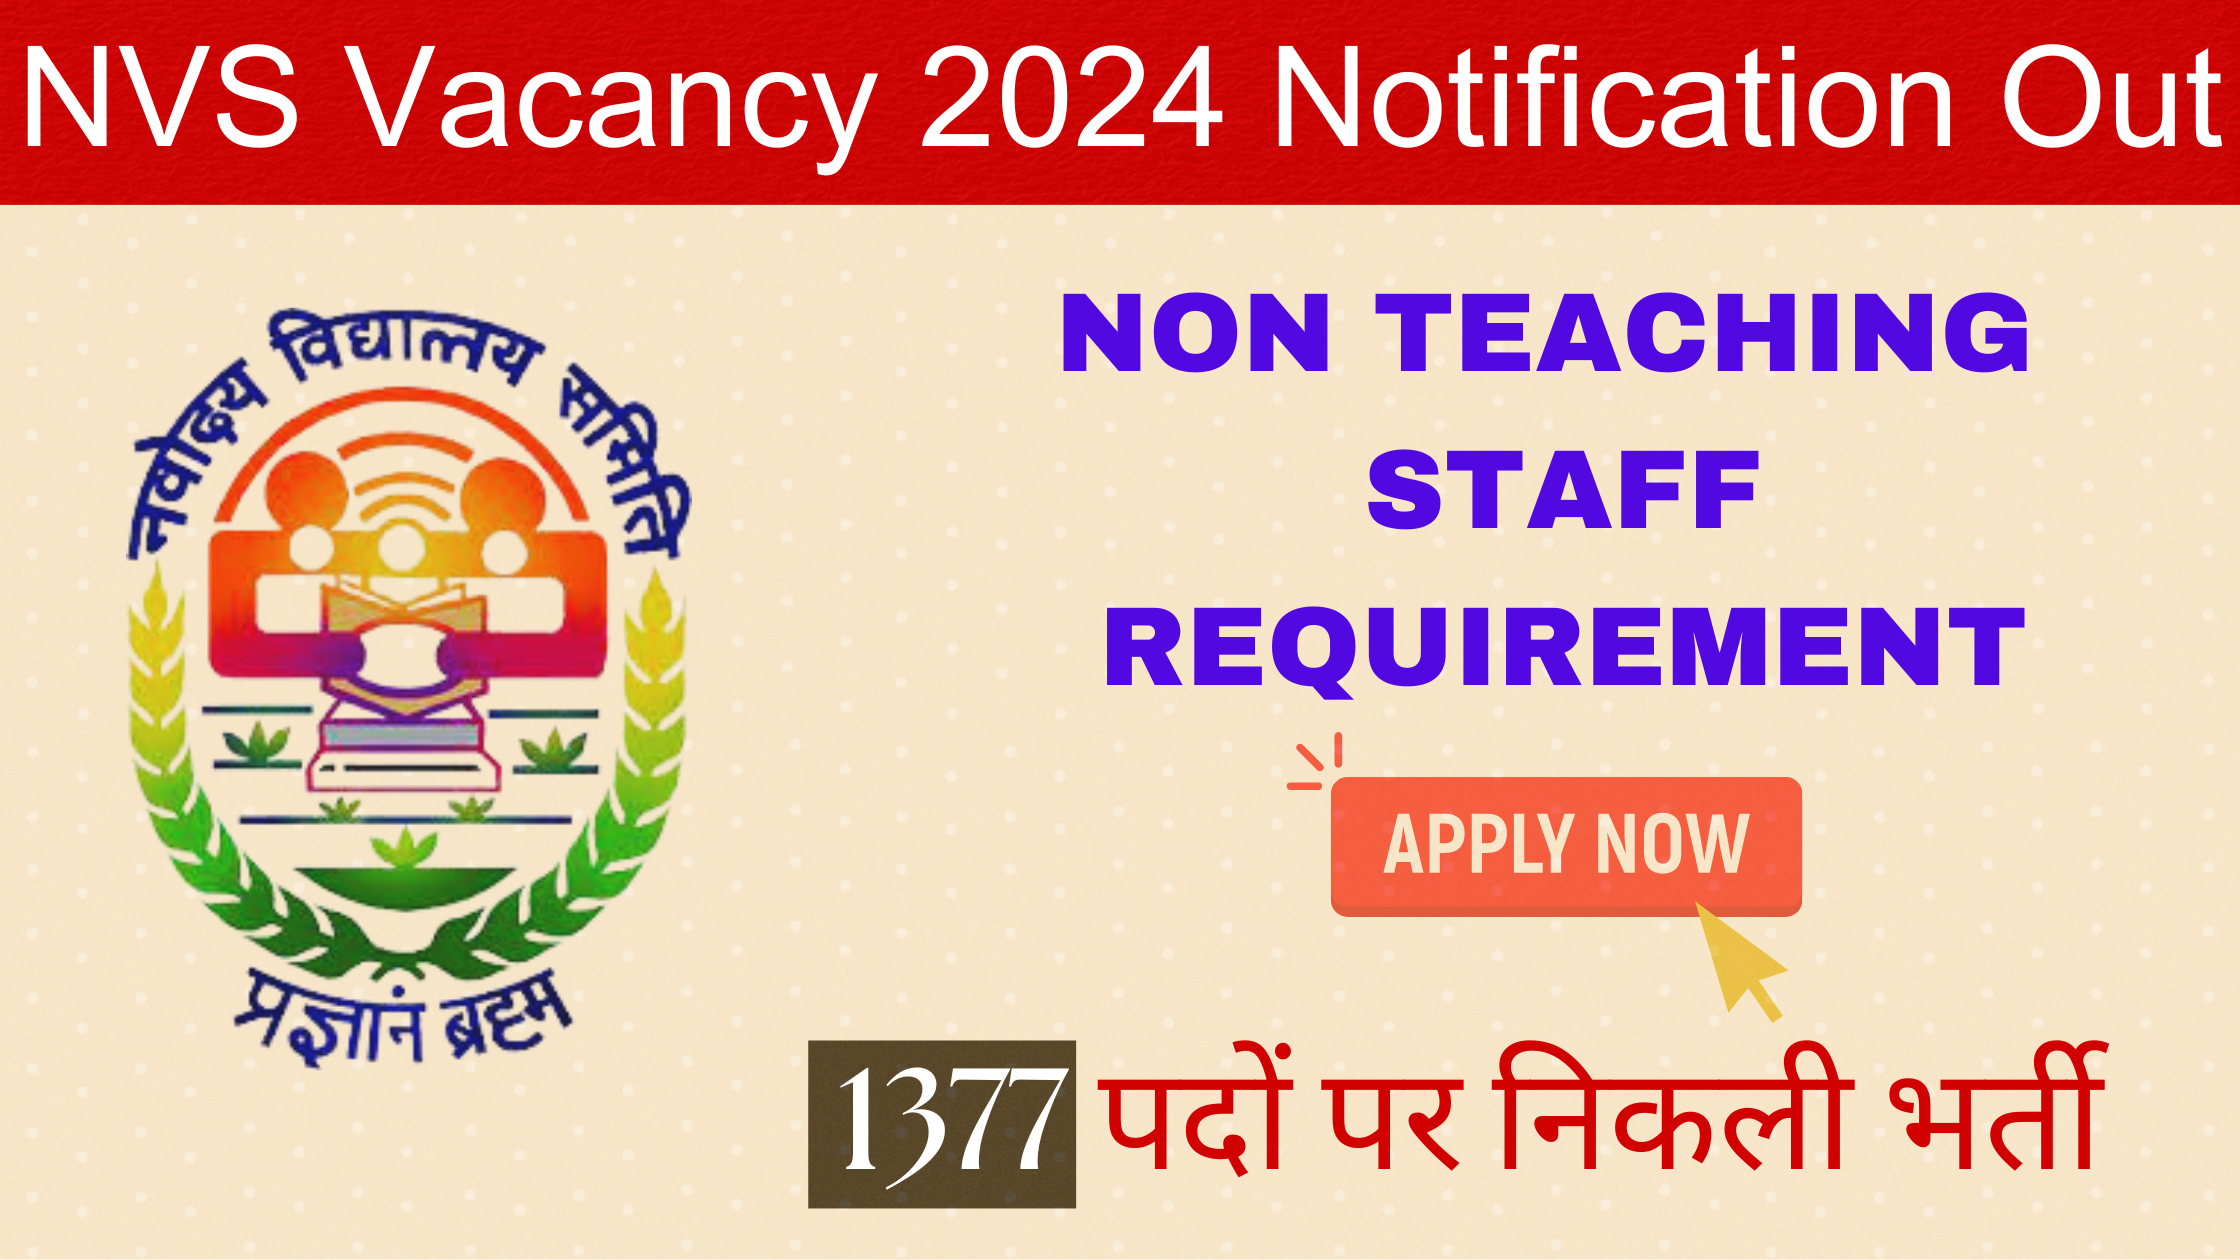 NVS Vacancy 2024 Notification Out